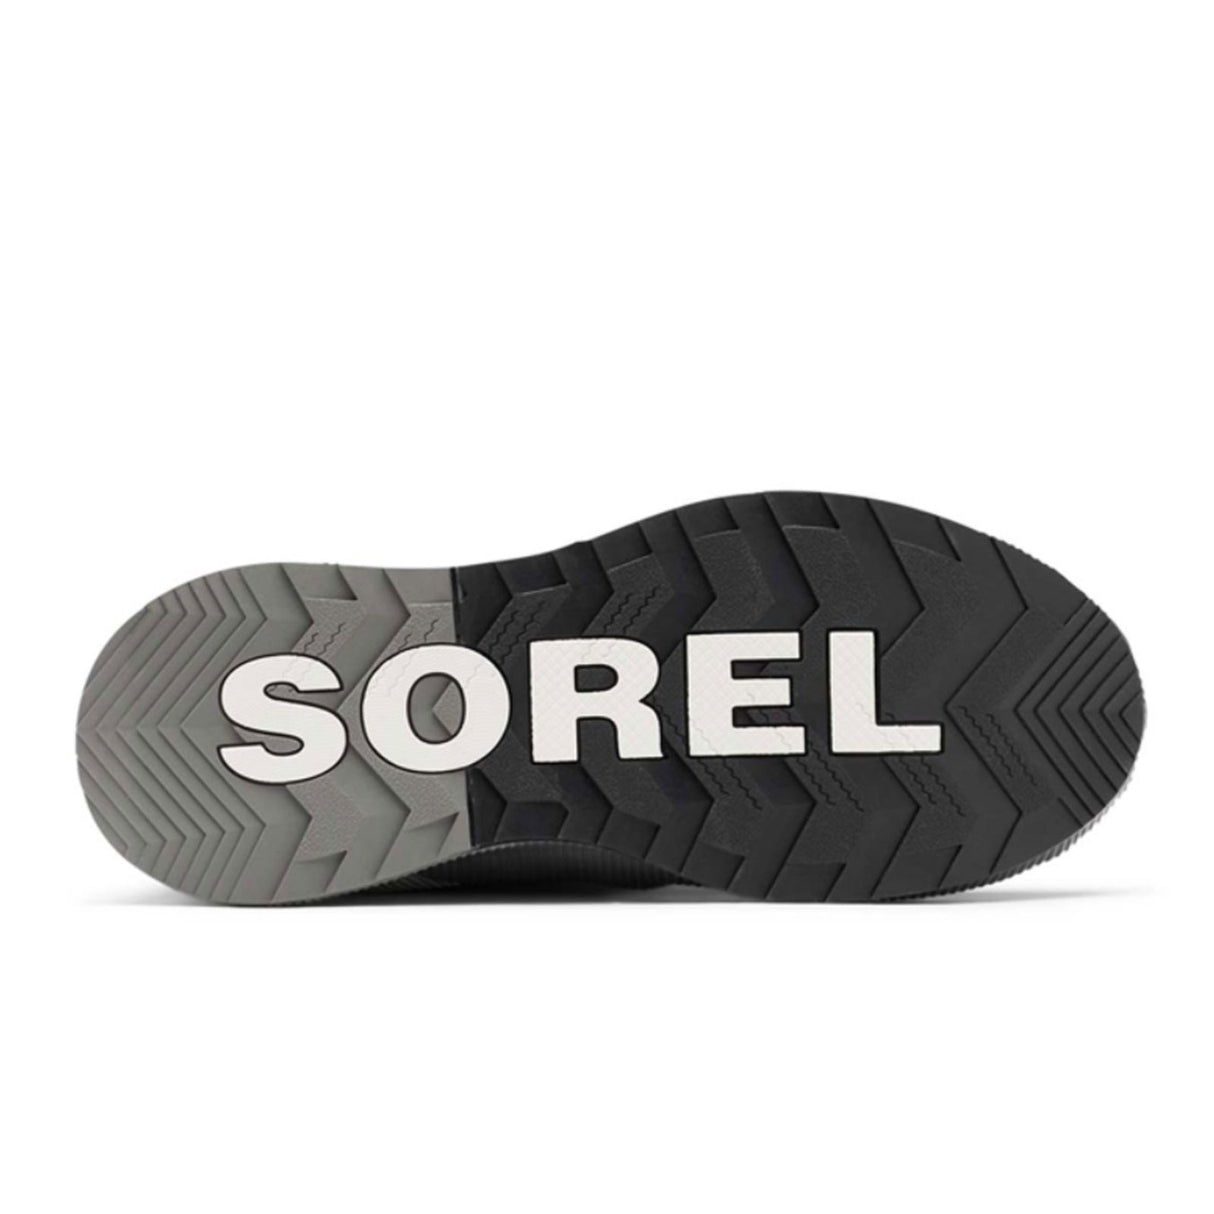 Sorel Out 'N About III Classic Waterproof Ankle Boot (Women) - Black/Sea Salt Boots - Winter - Ankle Boot - The Heel Shoe Fitters